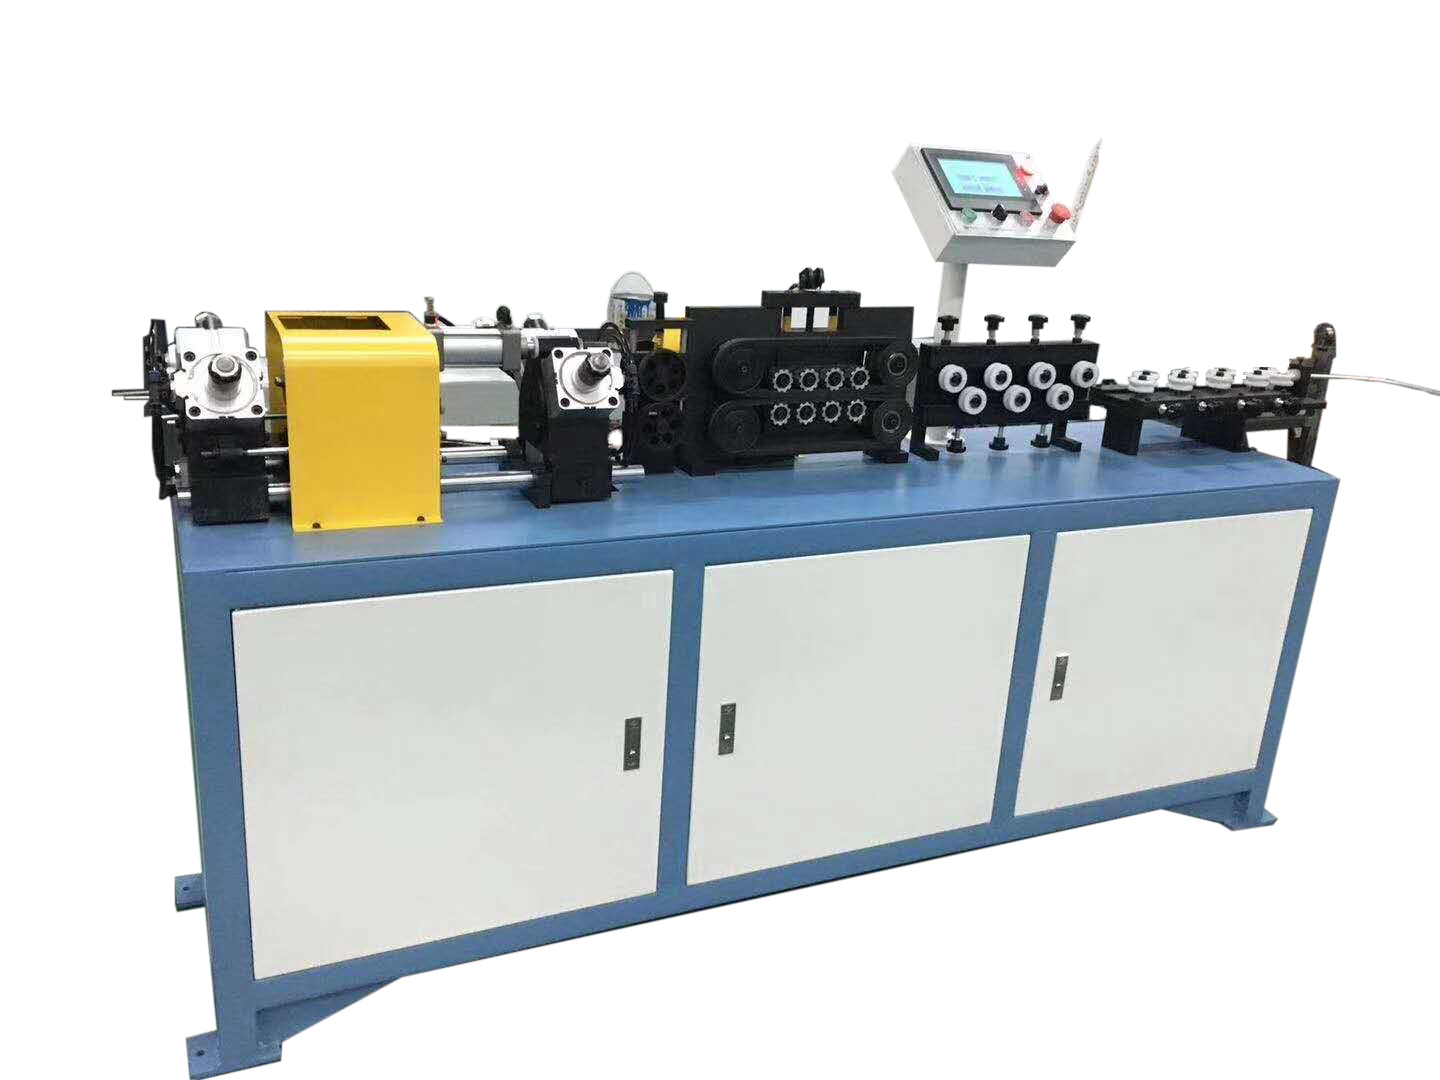 Qipang automatic tube straightener and cutter copper pipe straightening tool wire straightening and cutting machine